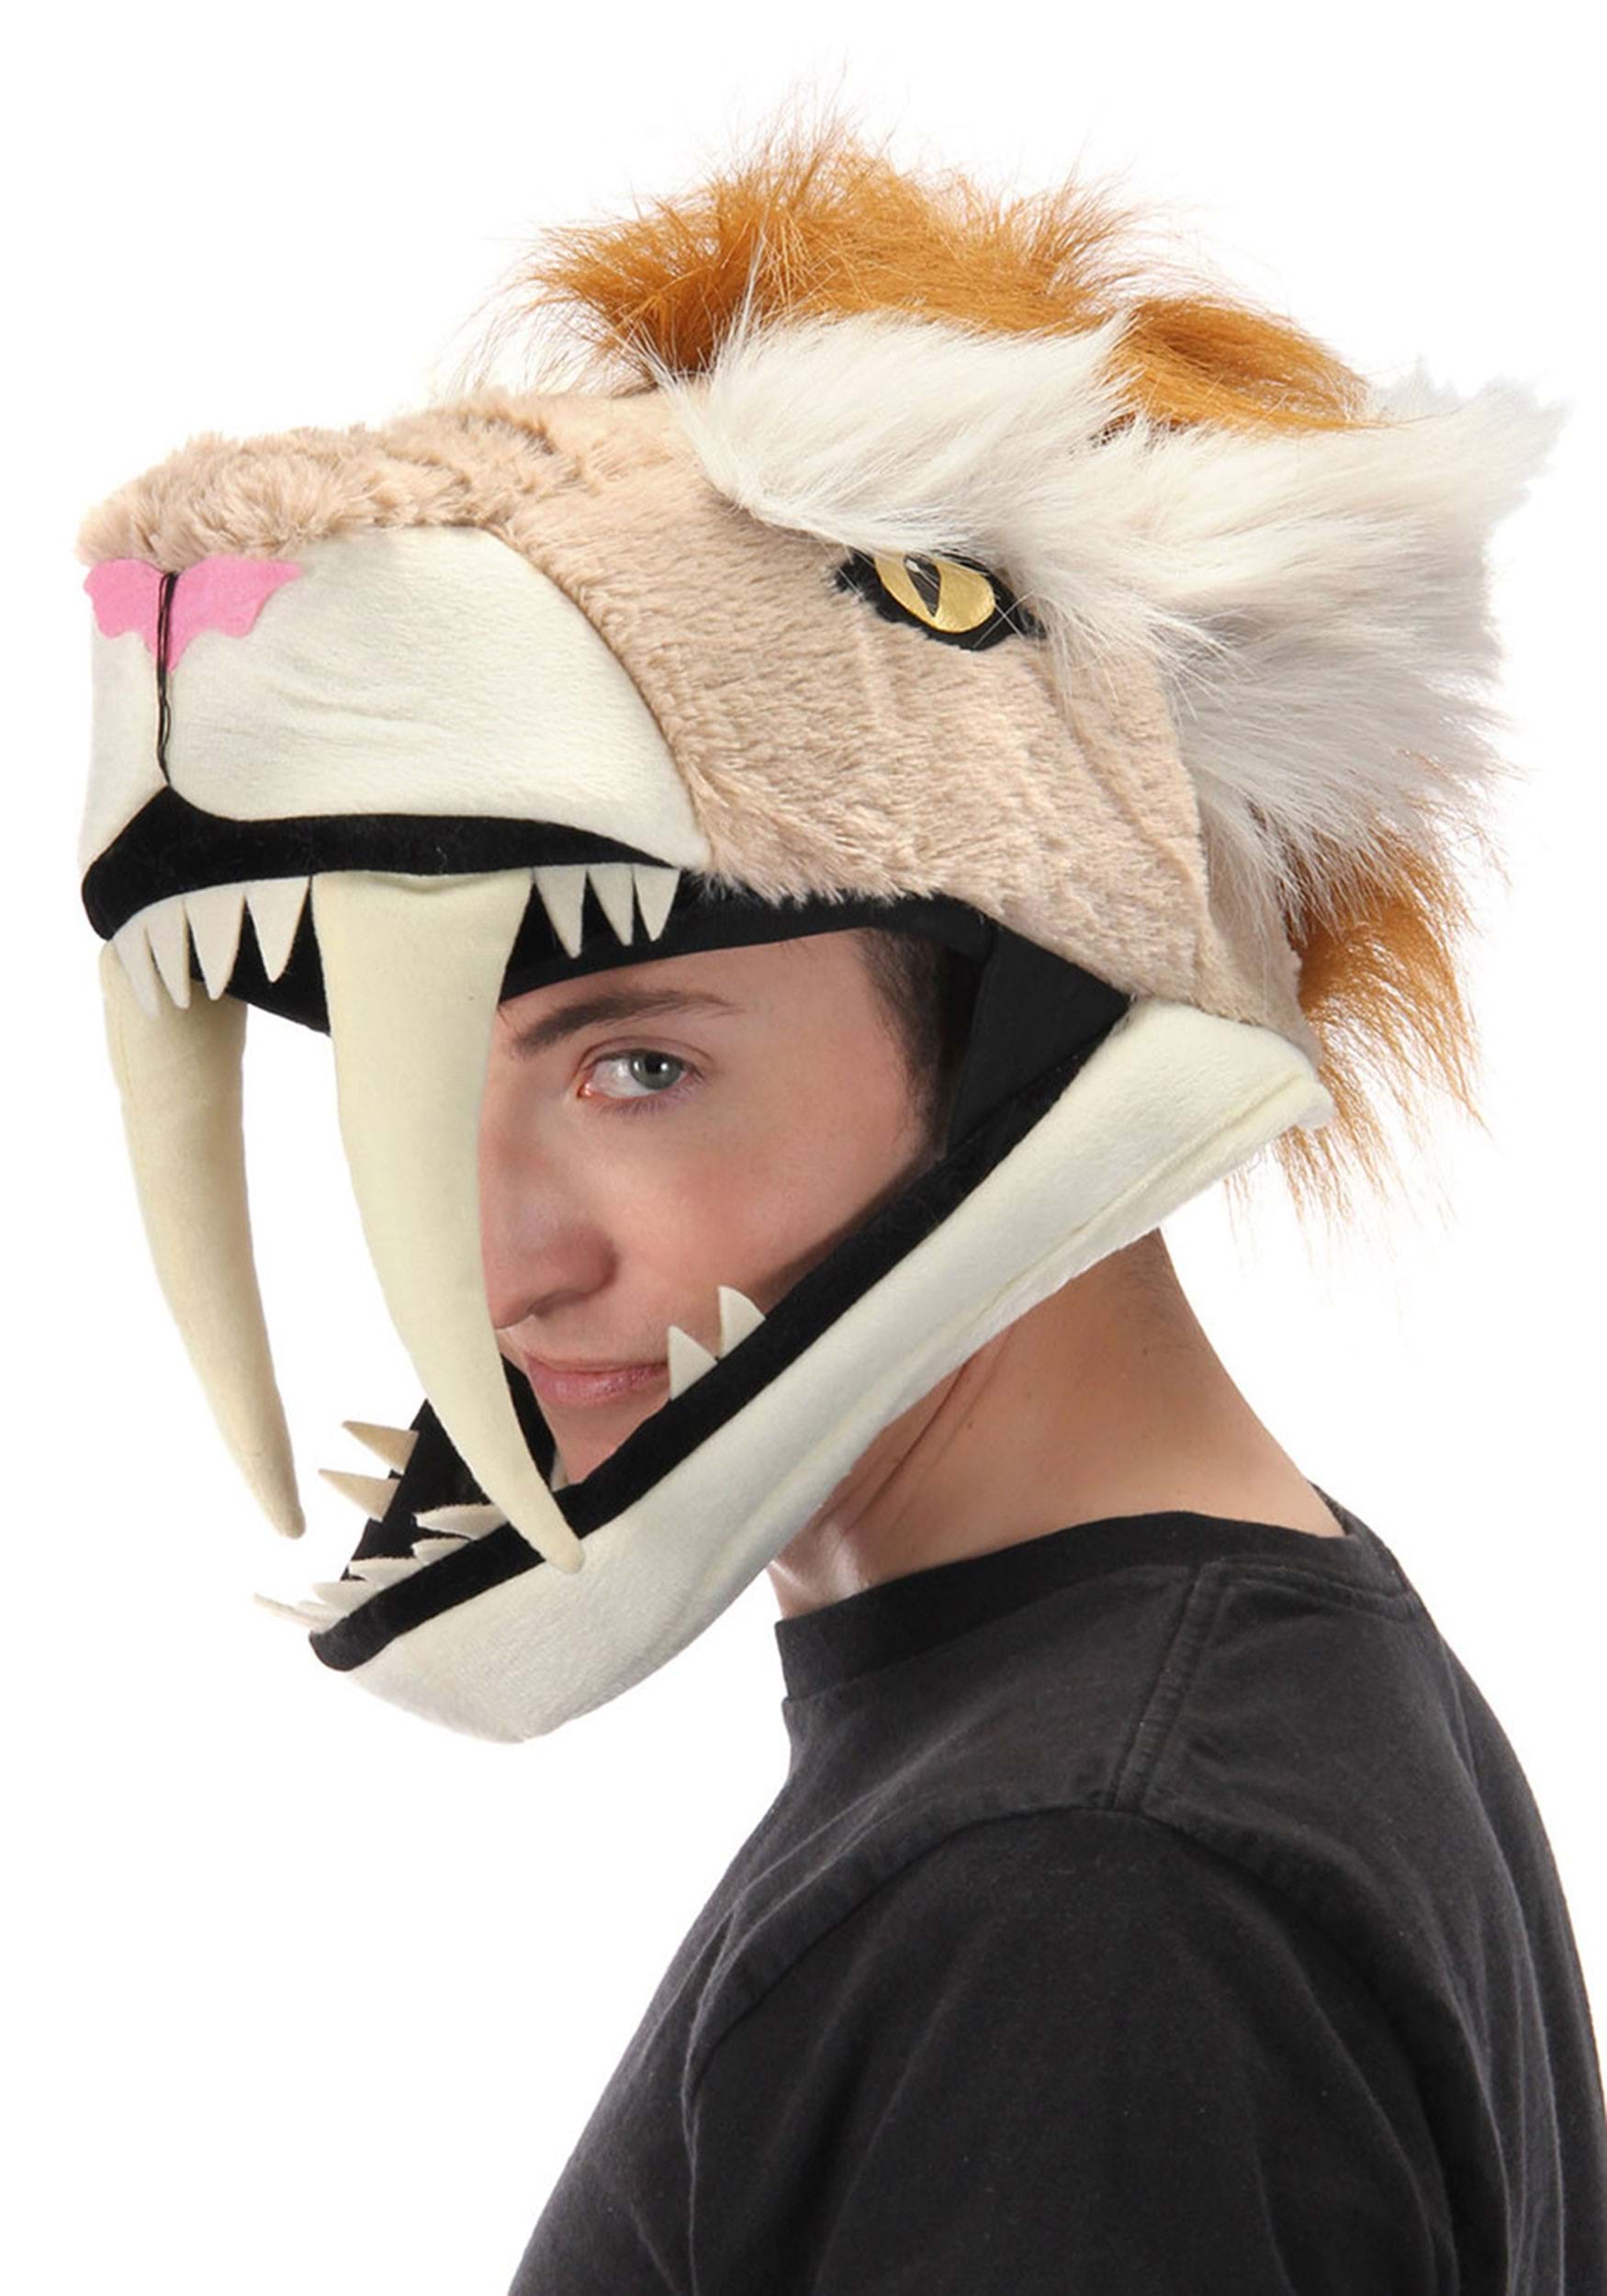 Light Up Anglerfish Jawesome Costume Hat Mask 